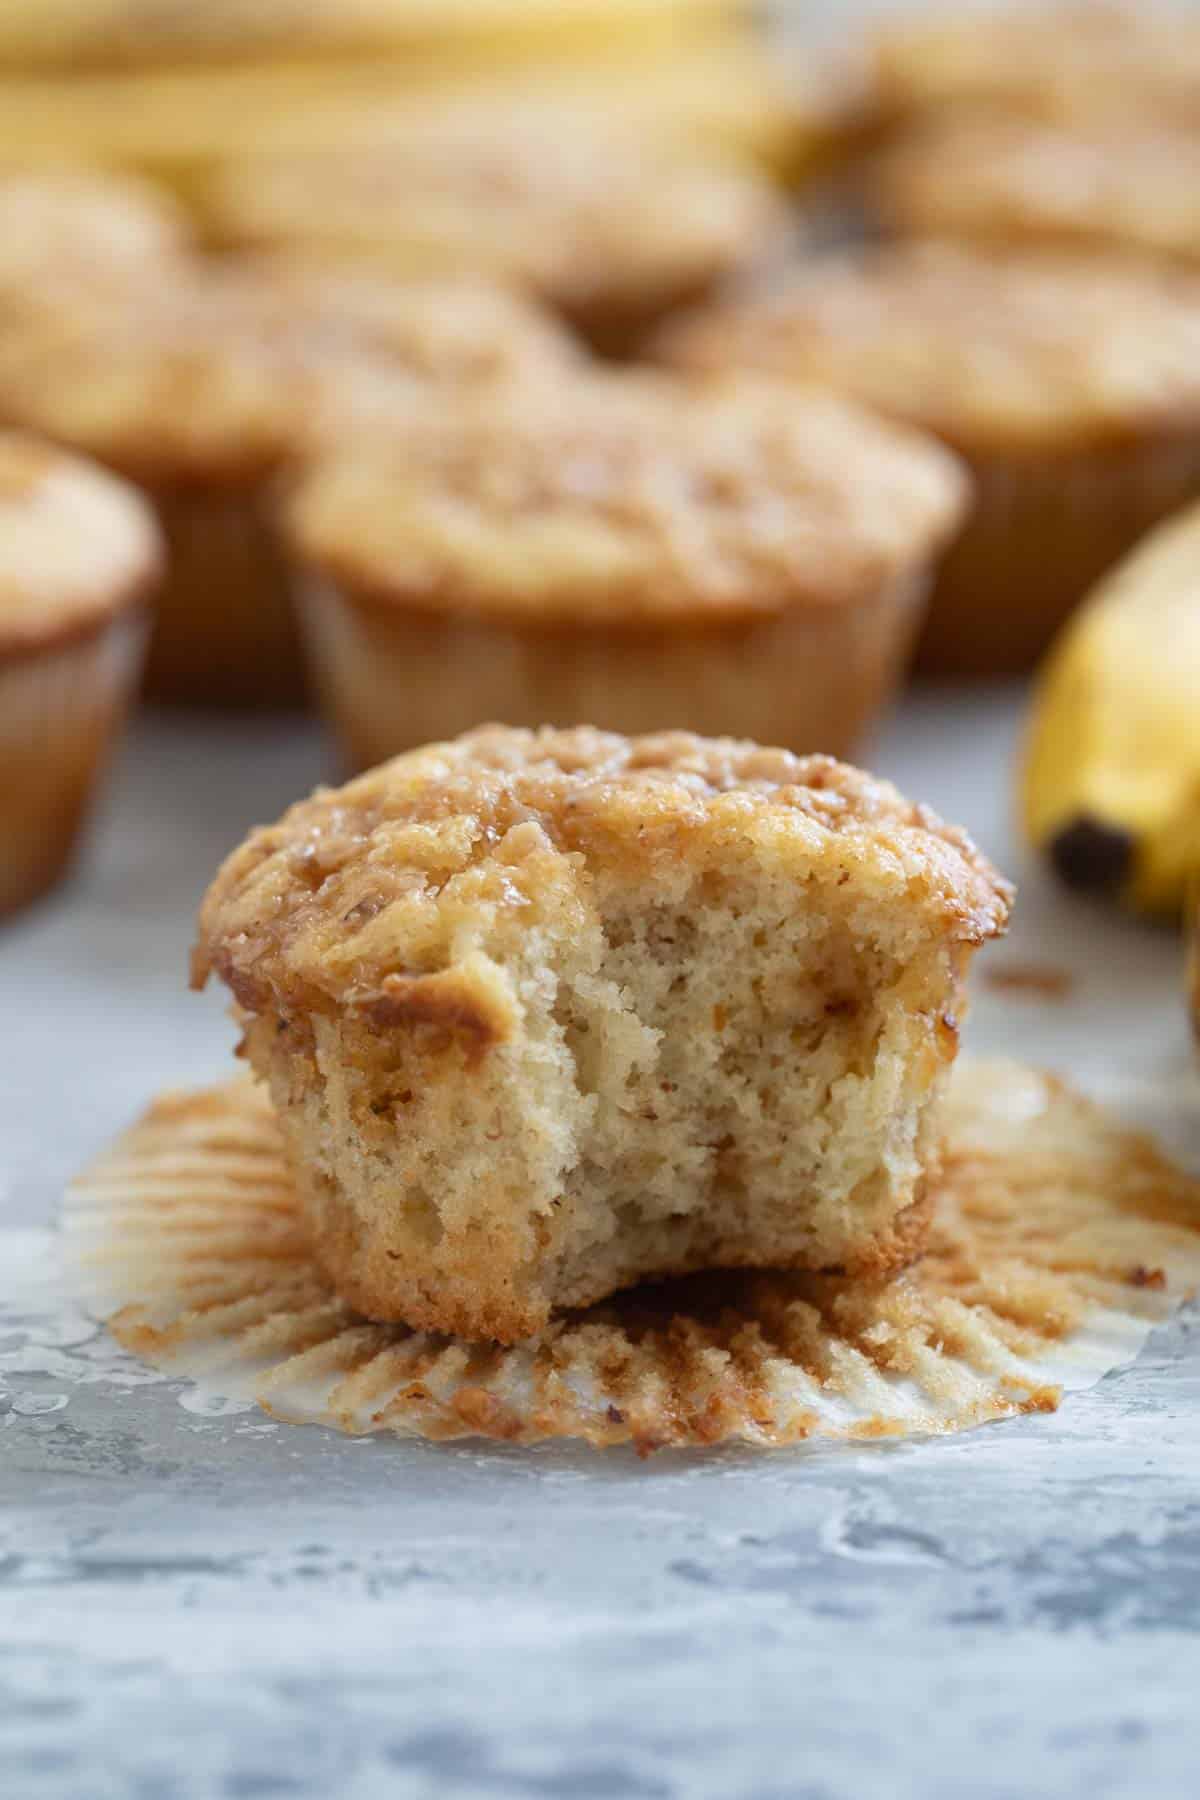 Banana toffee muffin with a bite taken out of it.